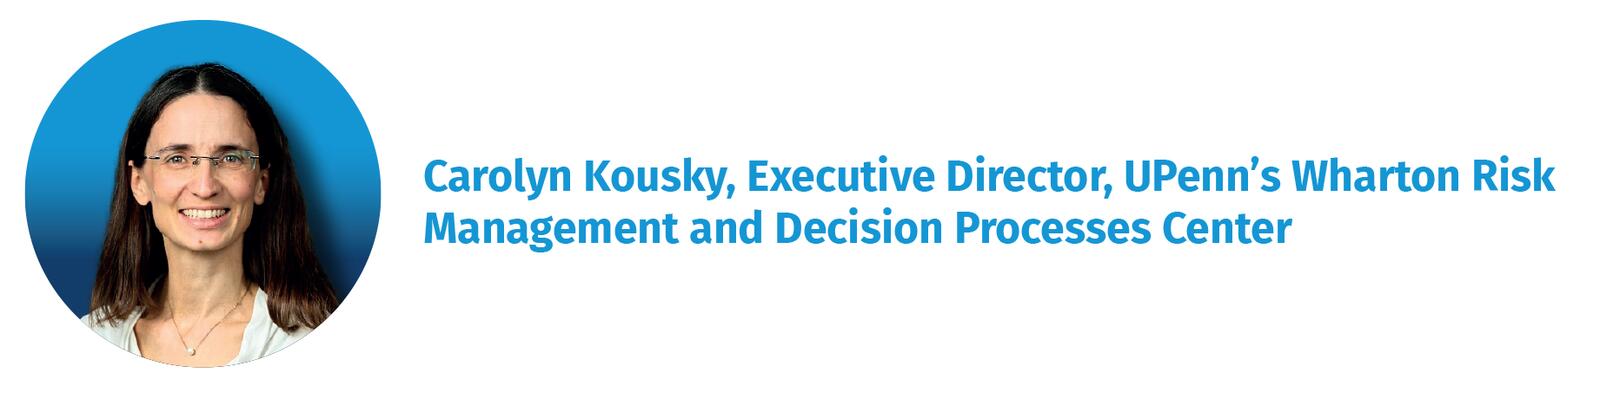 Carolyn Kousky, Executive Director, UPenn’s Wharton Risk Management and Decision Processes Center